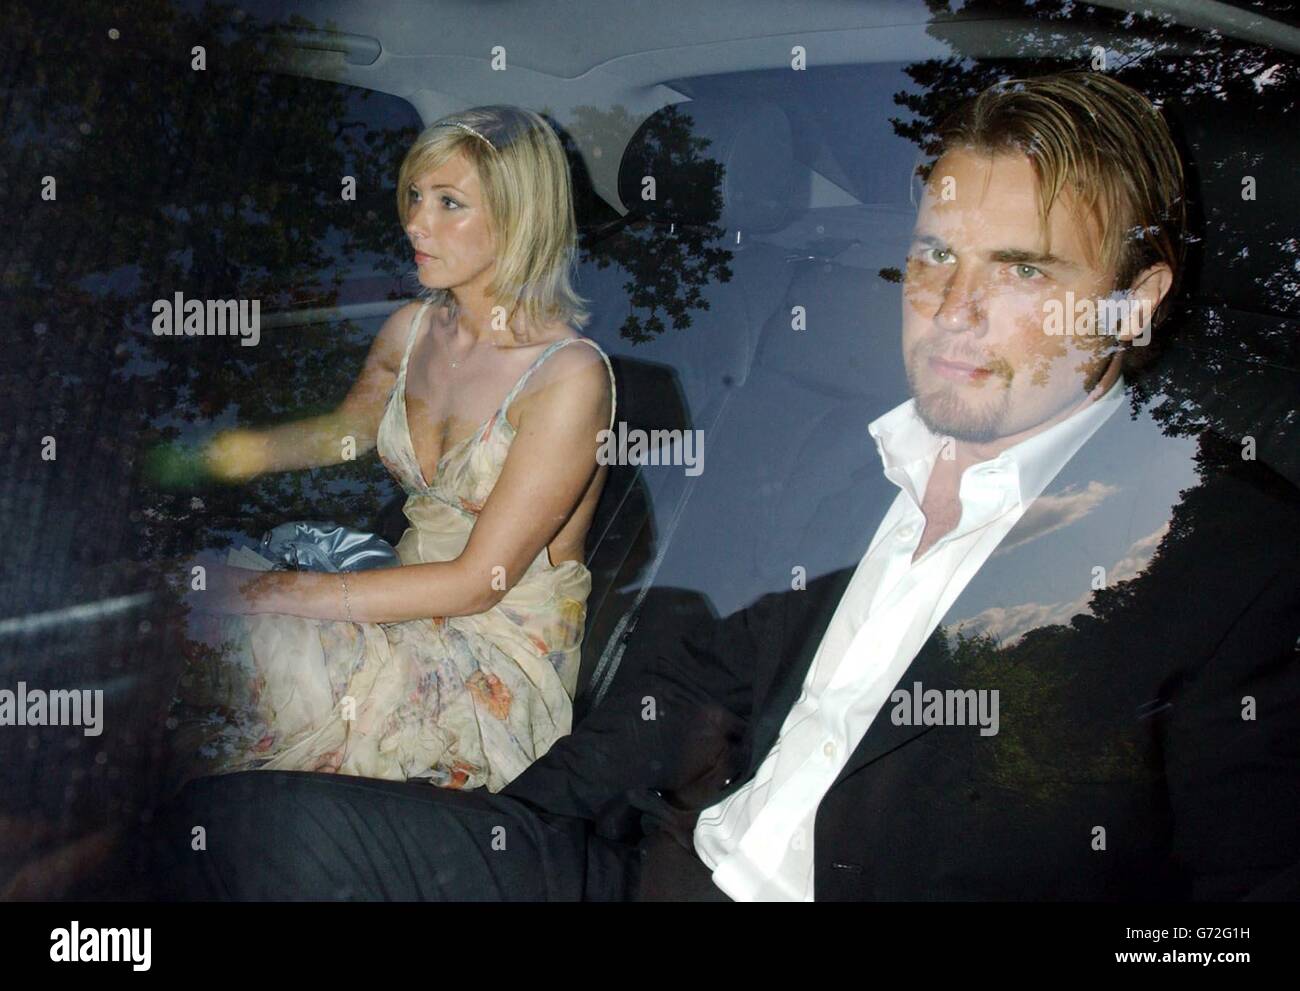 Former Take That singer Gary Barlow and his wife, Dawn arrive for Sir Elton John's White Tie and Tiara Ball at his Berkshire mansion in Woodside, Crimp Hill, Old Windsor. All funds from the exclusive private party go to the Elton John AIDS Foundation. Stock Photo